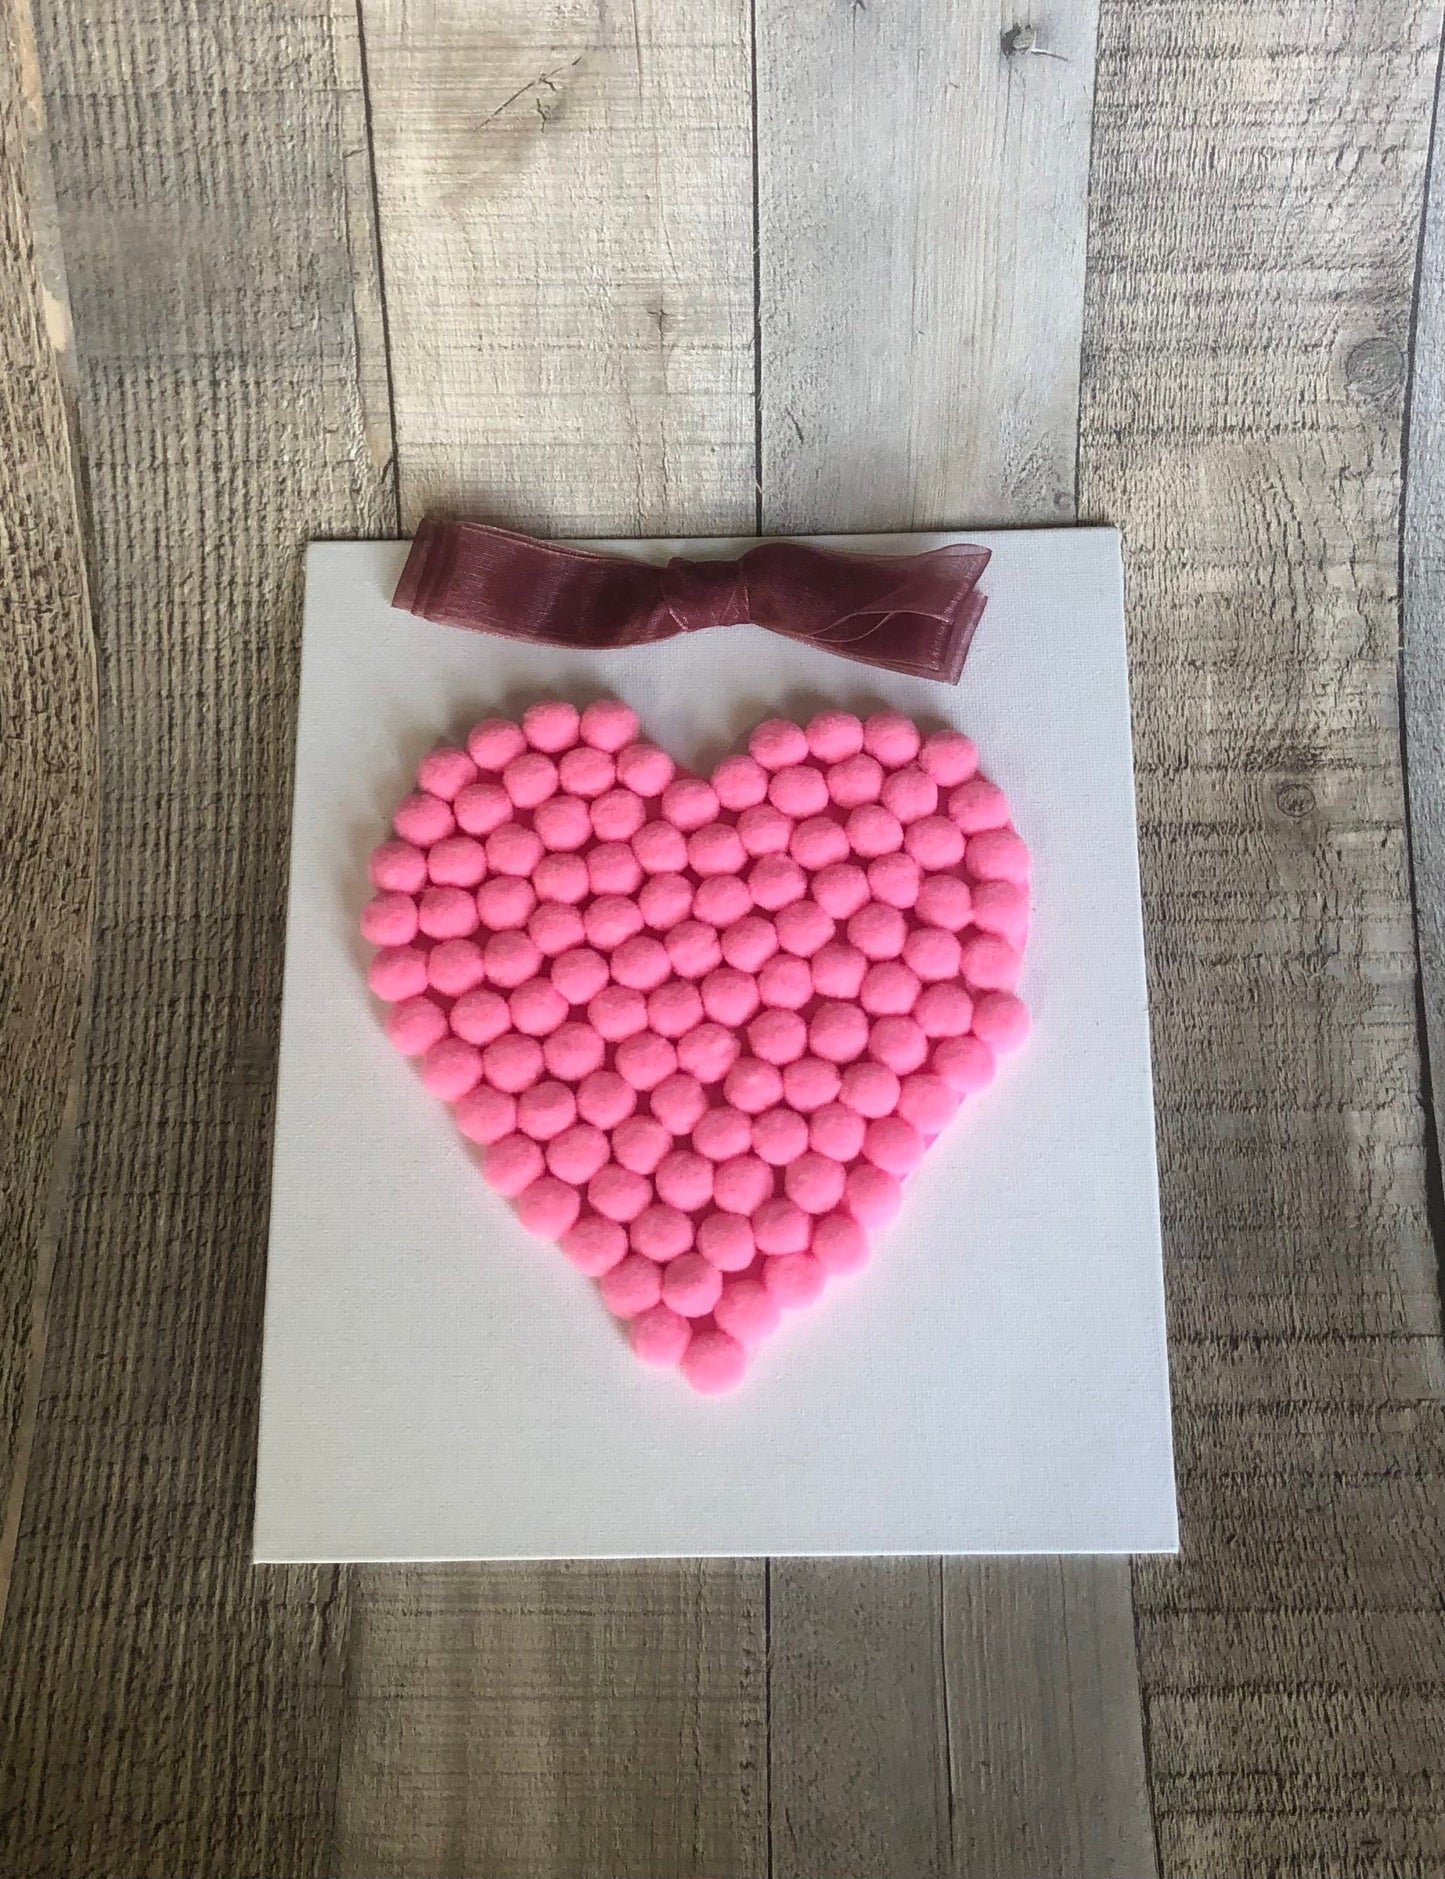 This is a Valentine's heart craft made with mini pom poms in pink. The craft kit is available on seniorlycreations.com.